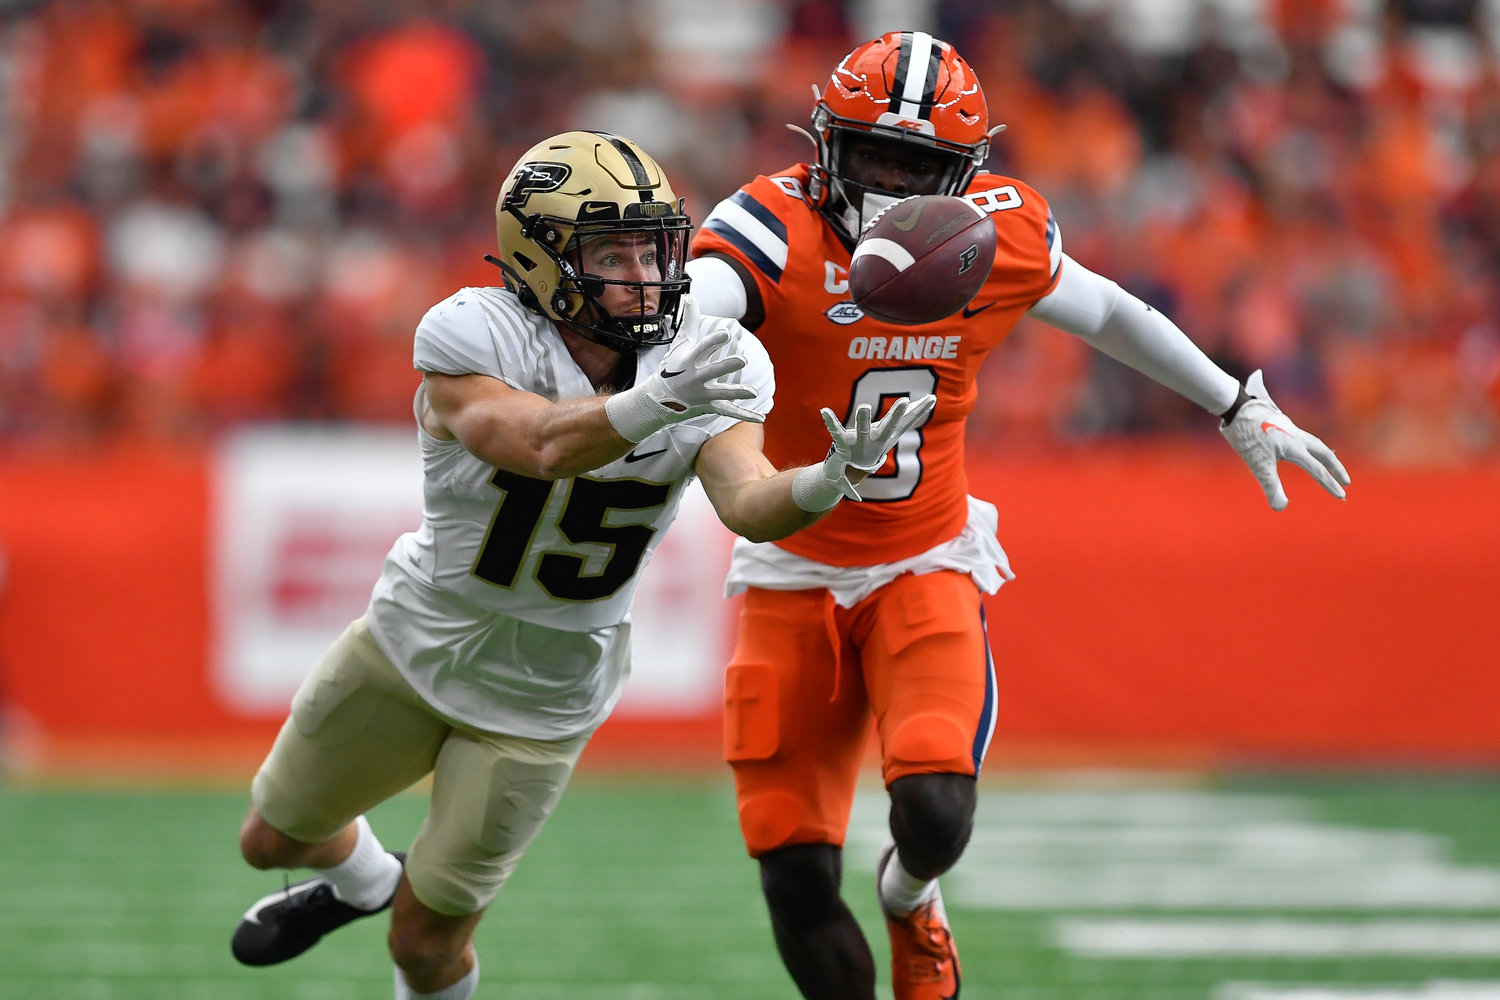 Purdue wide receiver Charlie Jones, left, reaches for a pass as Syracuse defensive back Garrett Williams defends during the first half of an NCAA college football game in Syracuse, N.Y., Saturday, Sept. 17, 2022.